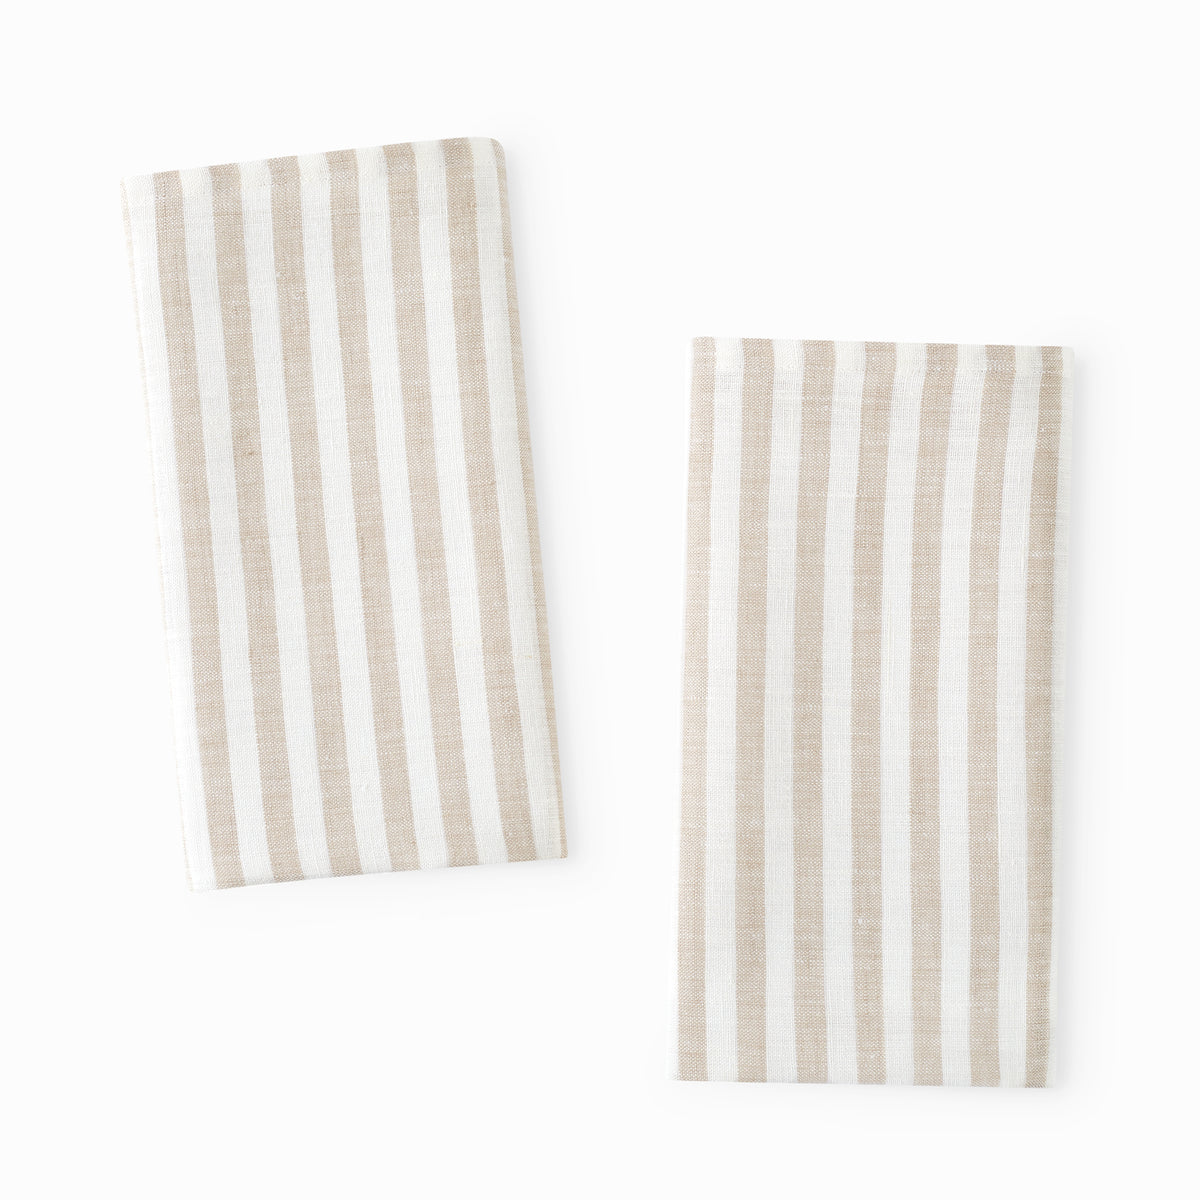 Unbleached cotton stripe fabric, sturdy strong off-white, cream